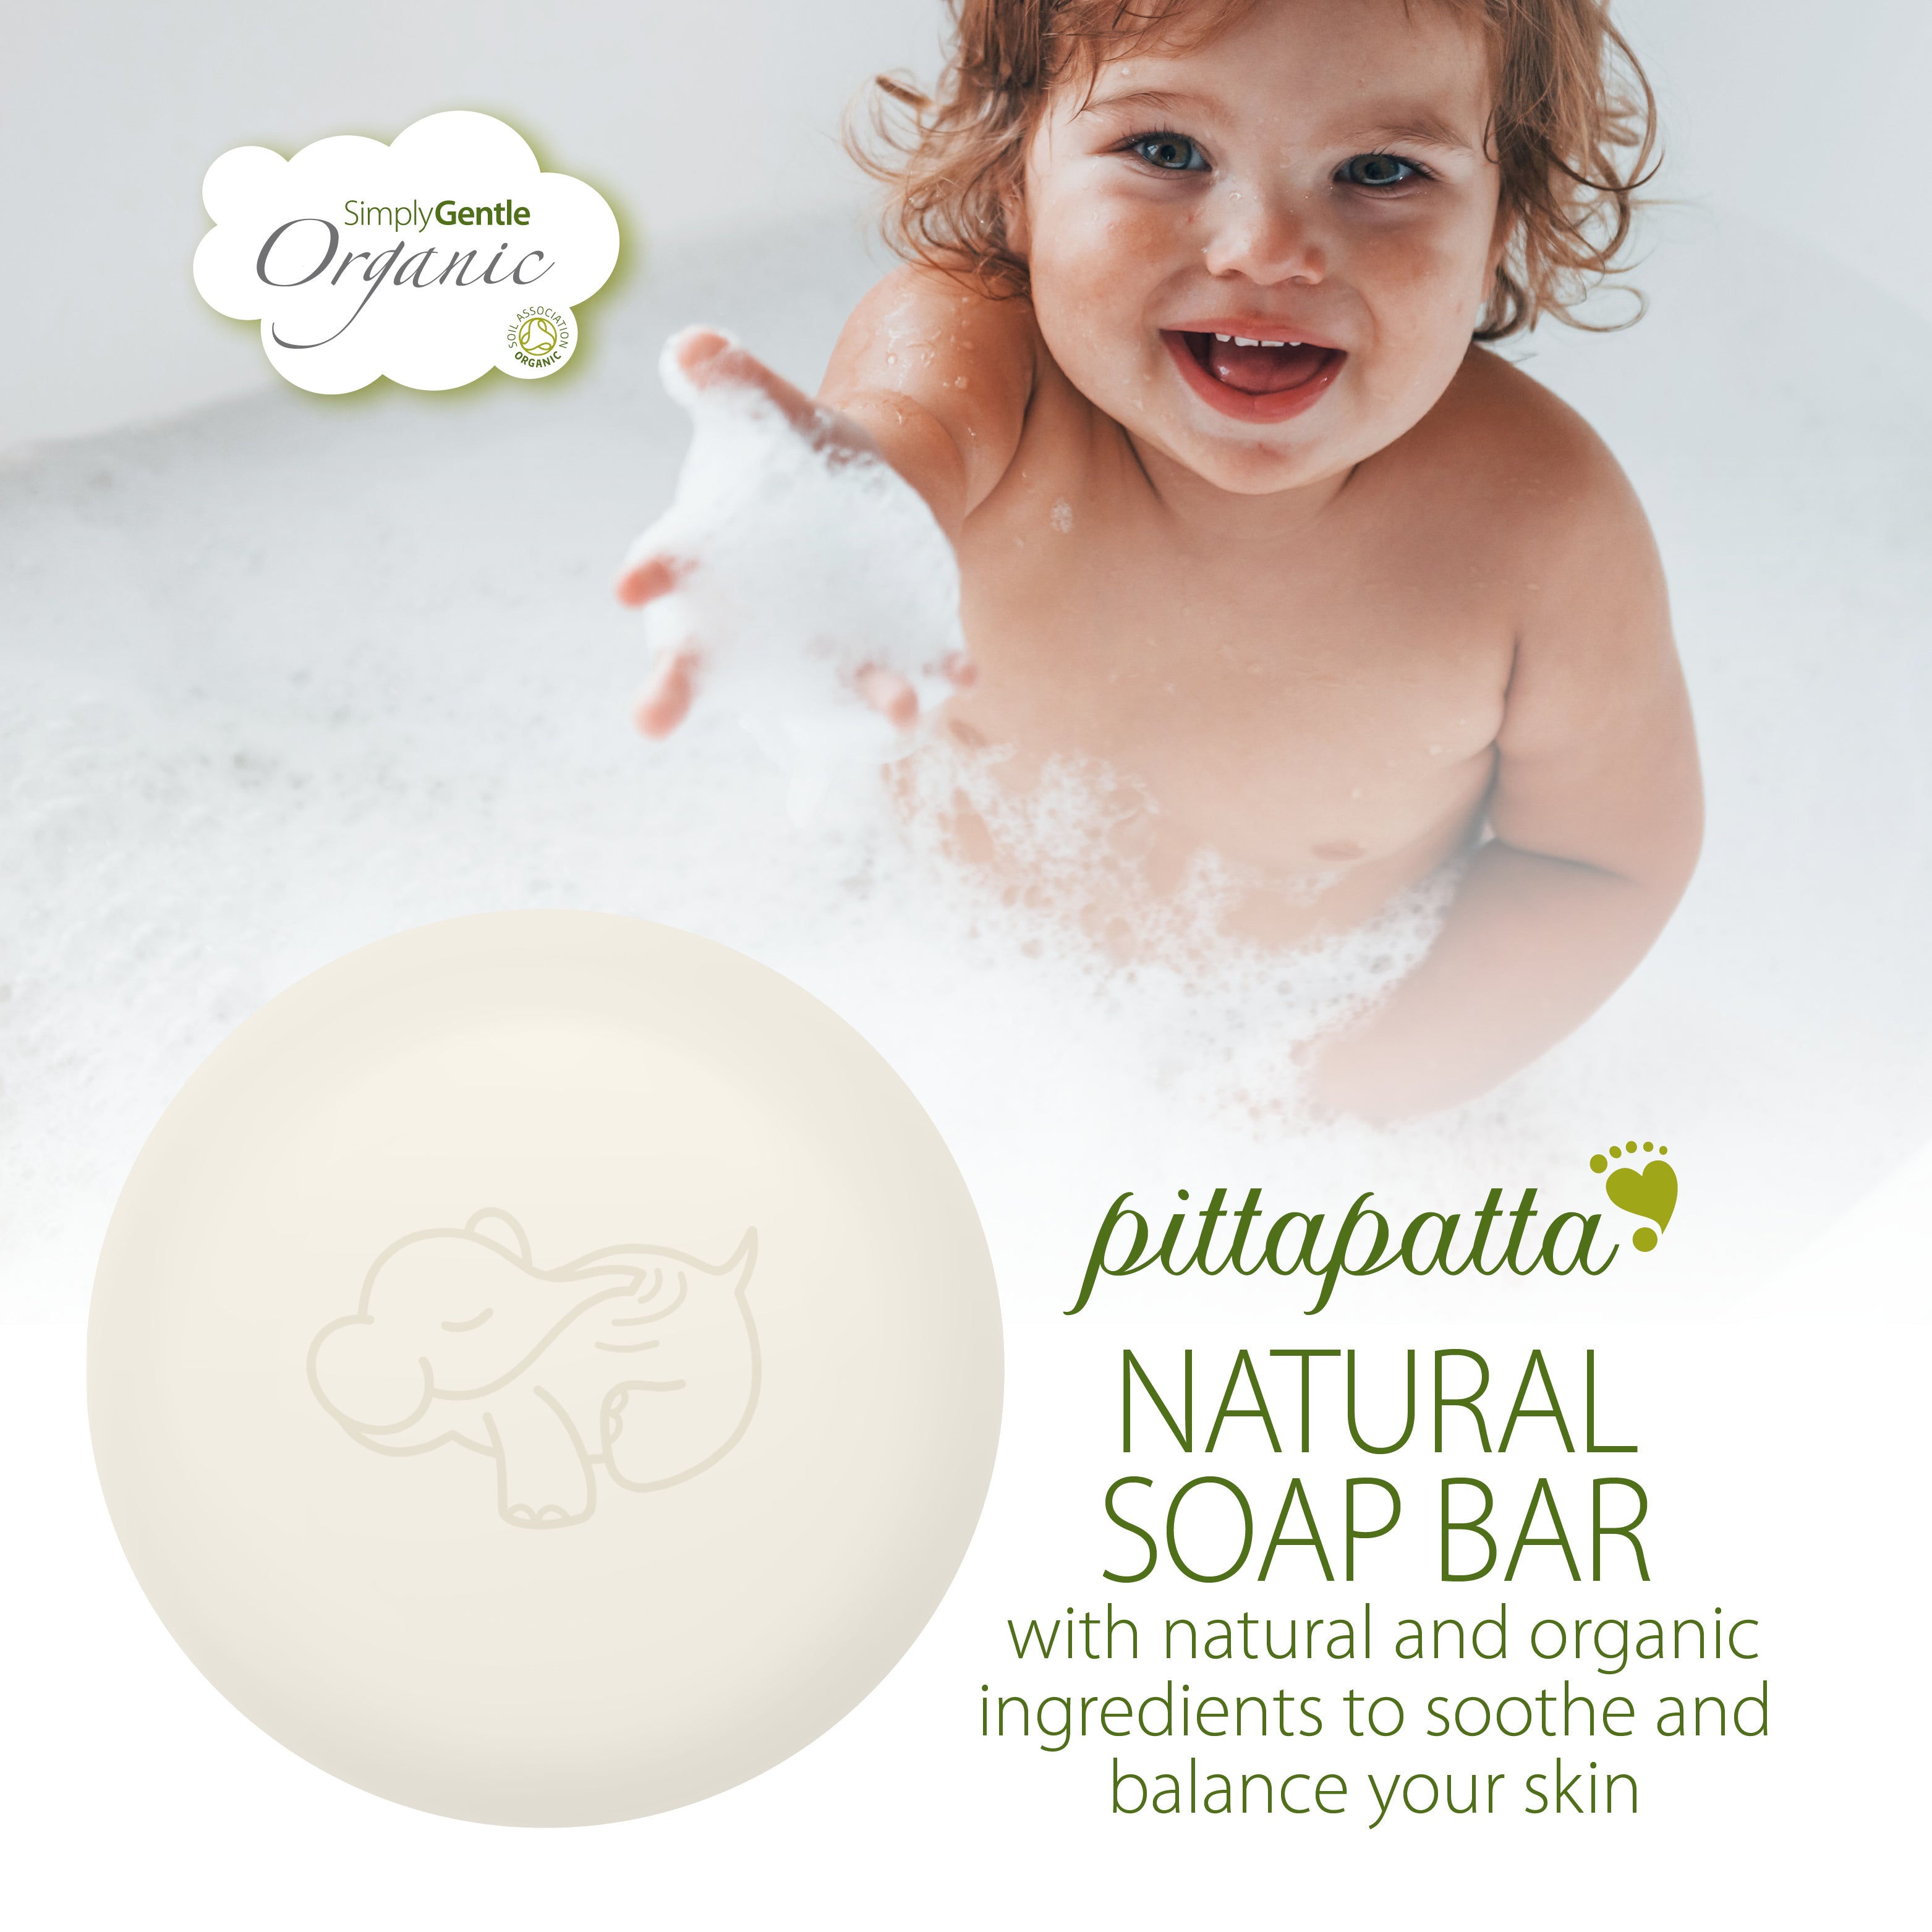 Pittapatta Natural Soap Bar made with natural and organic ingredients to soothe and balance your skin.